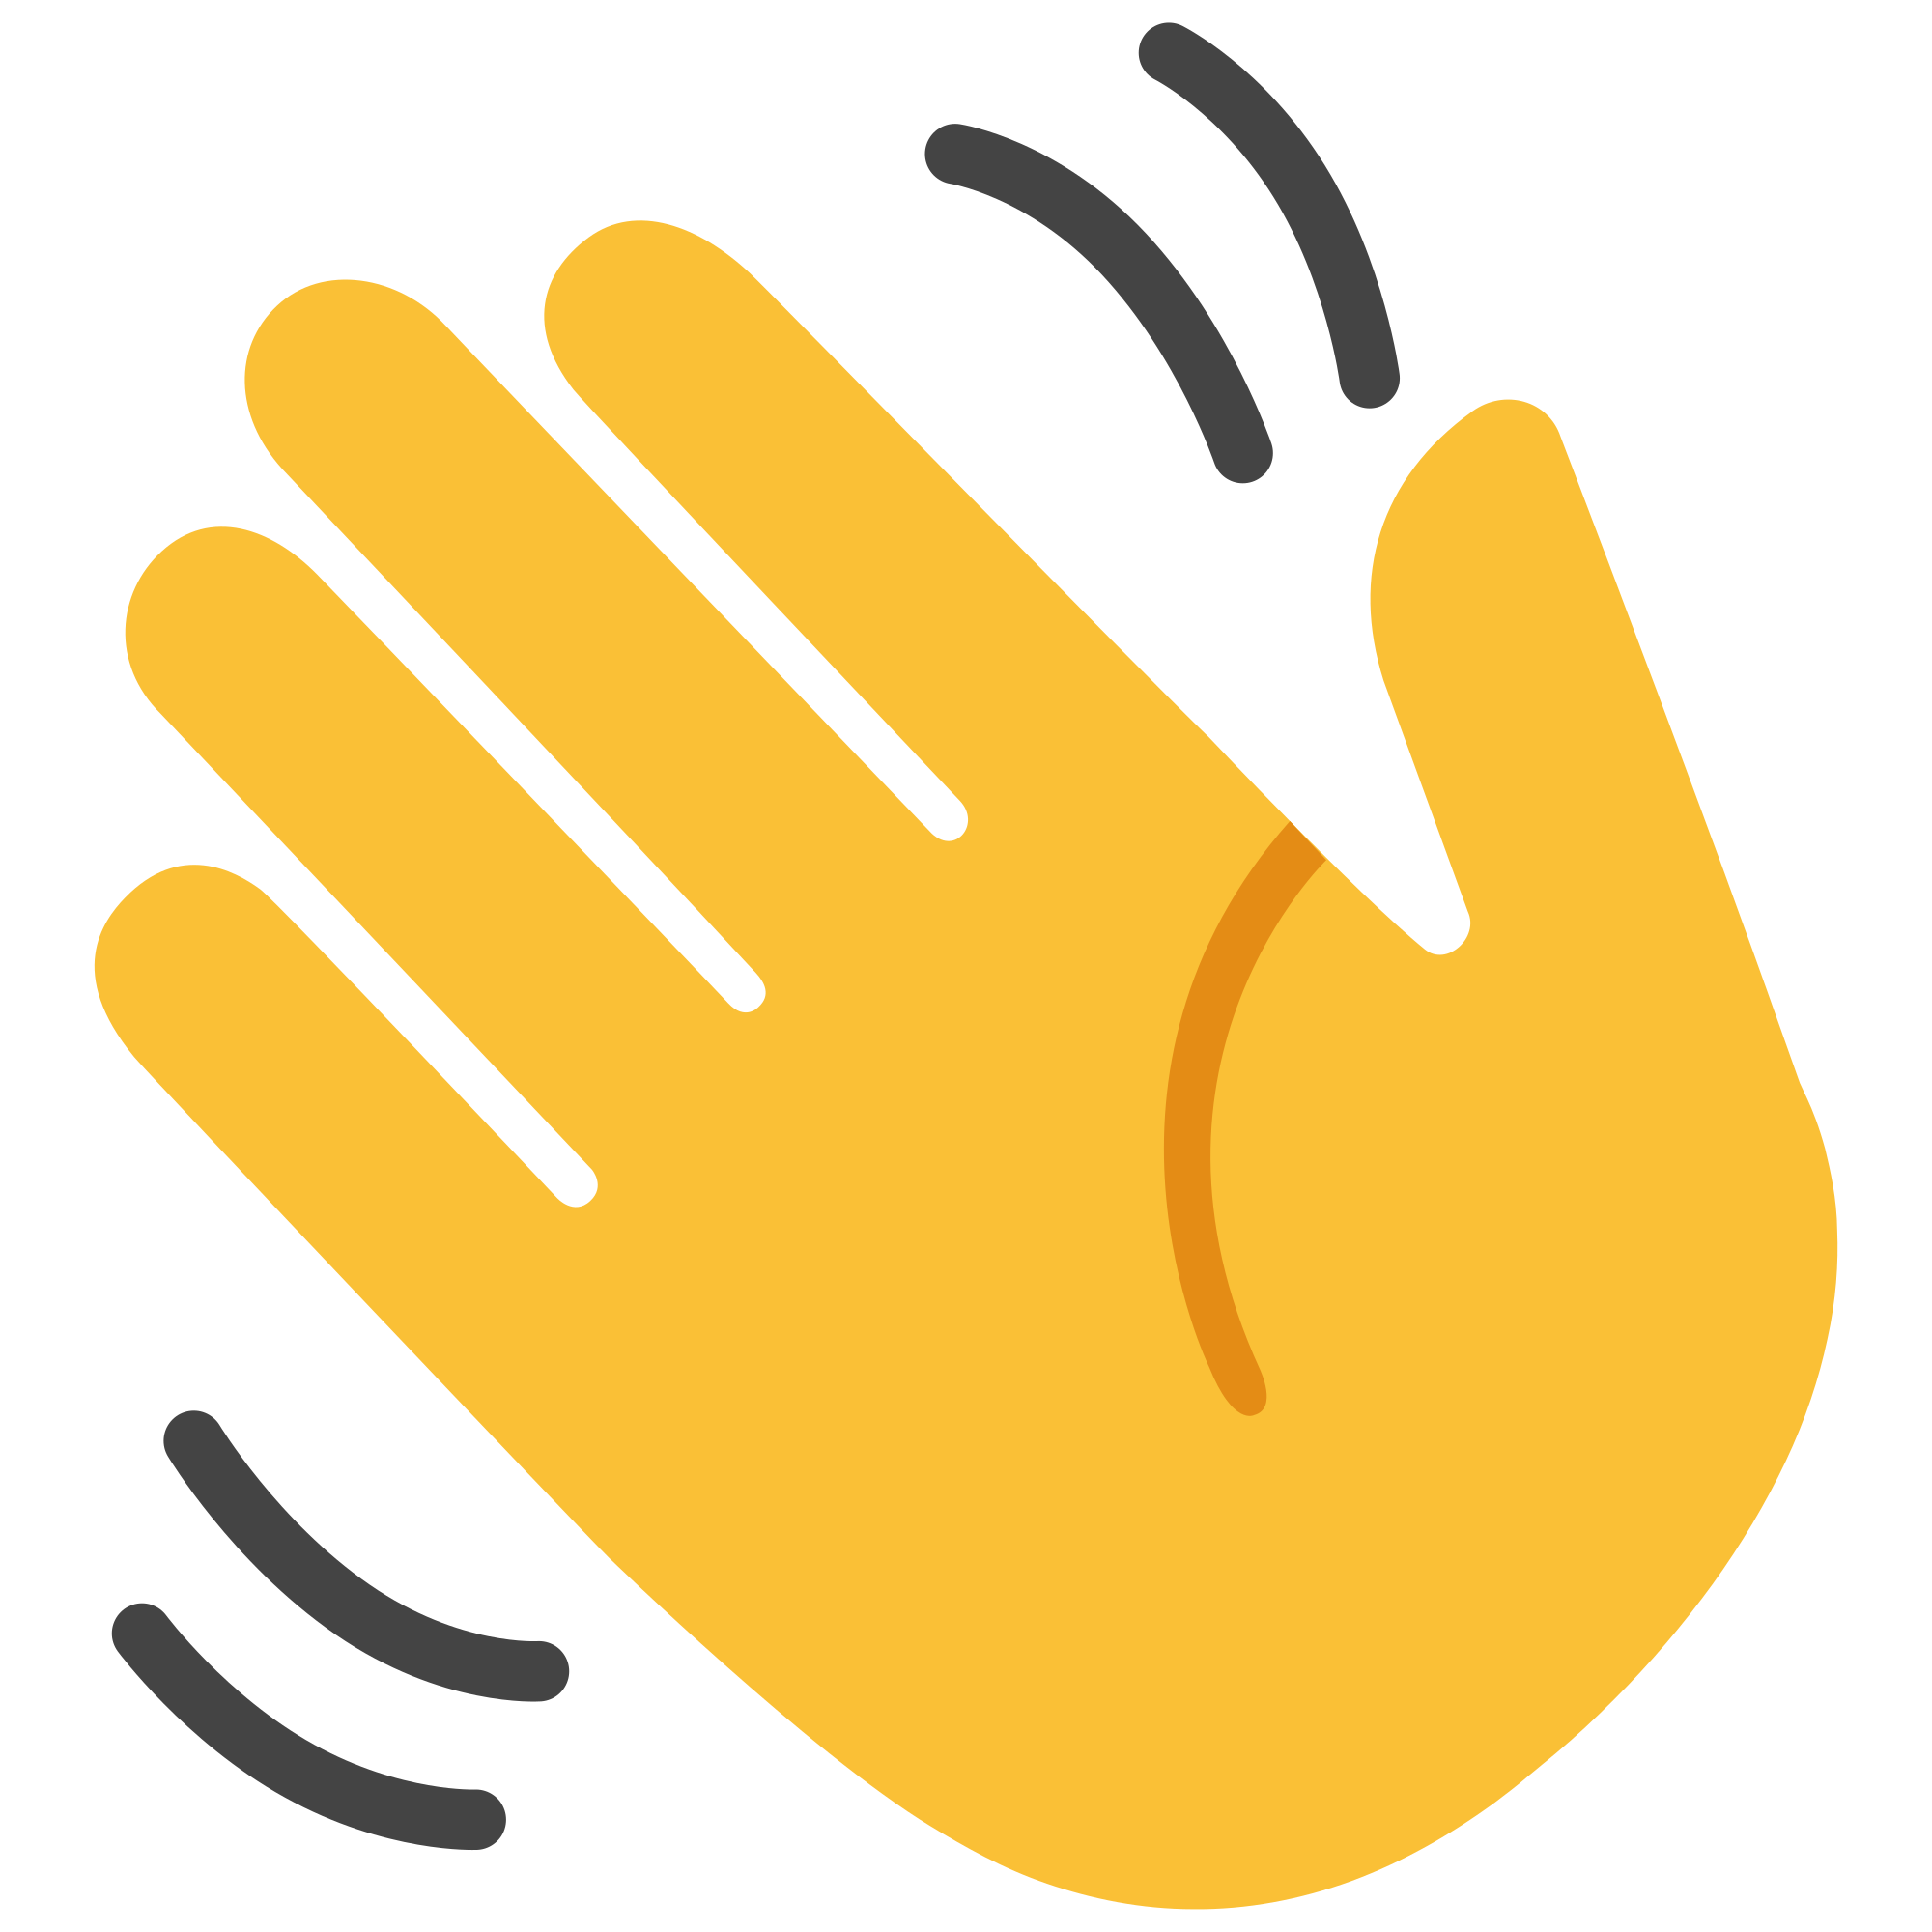 Hand clipart wave goodbye, Hand wave goodbye Transparent